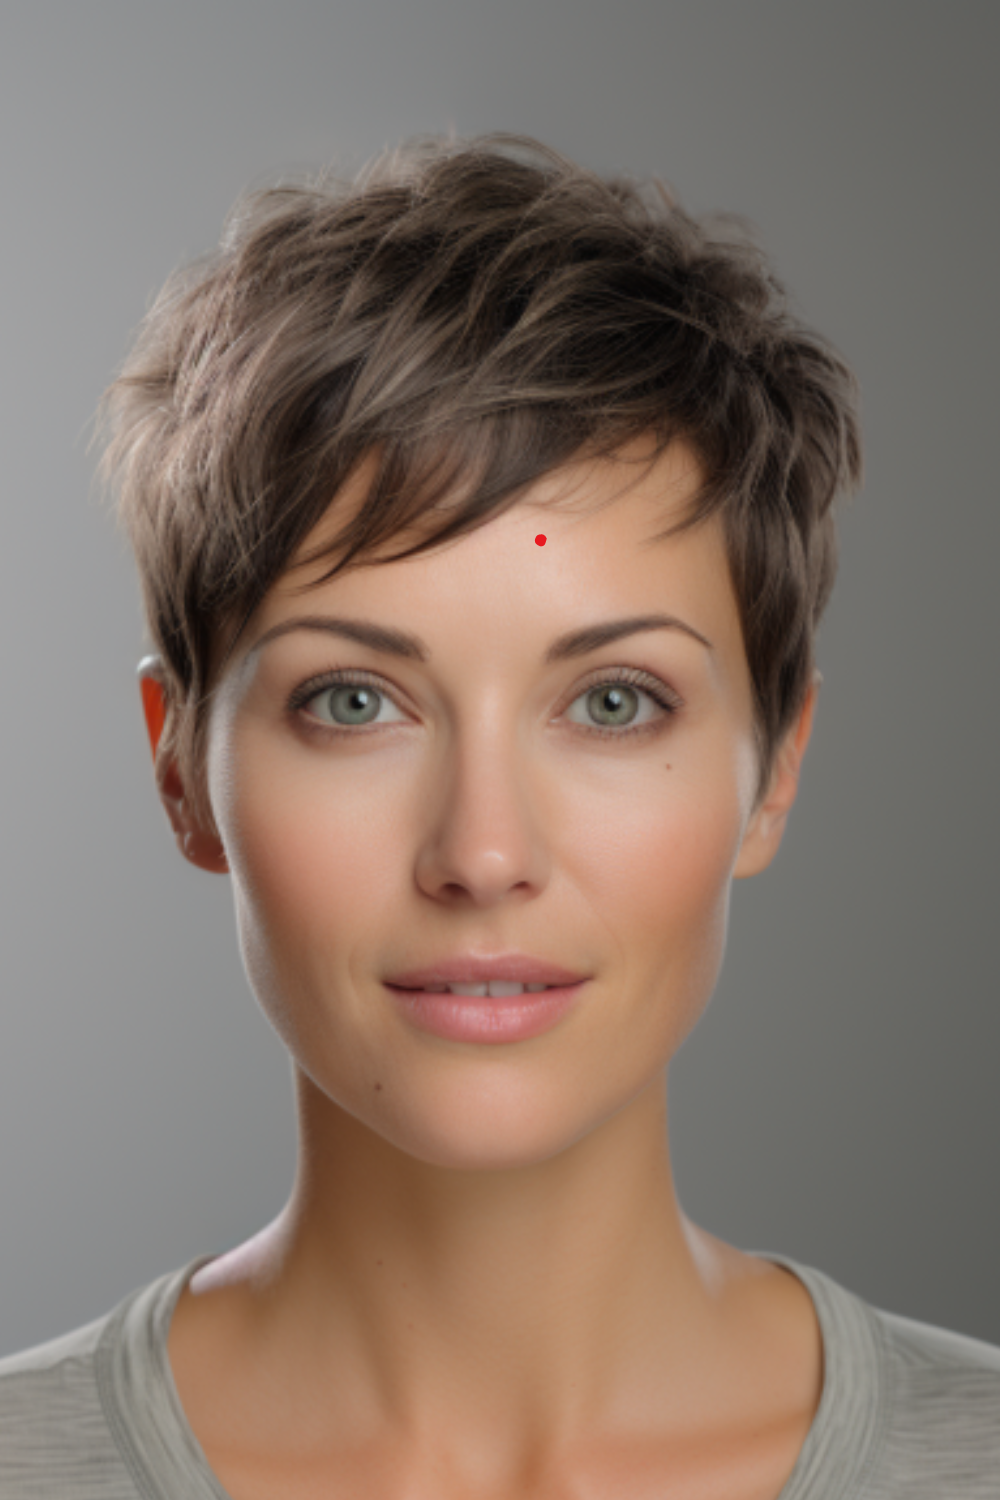 Rocking the Pixie: Embracing Very Short Hairstyles